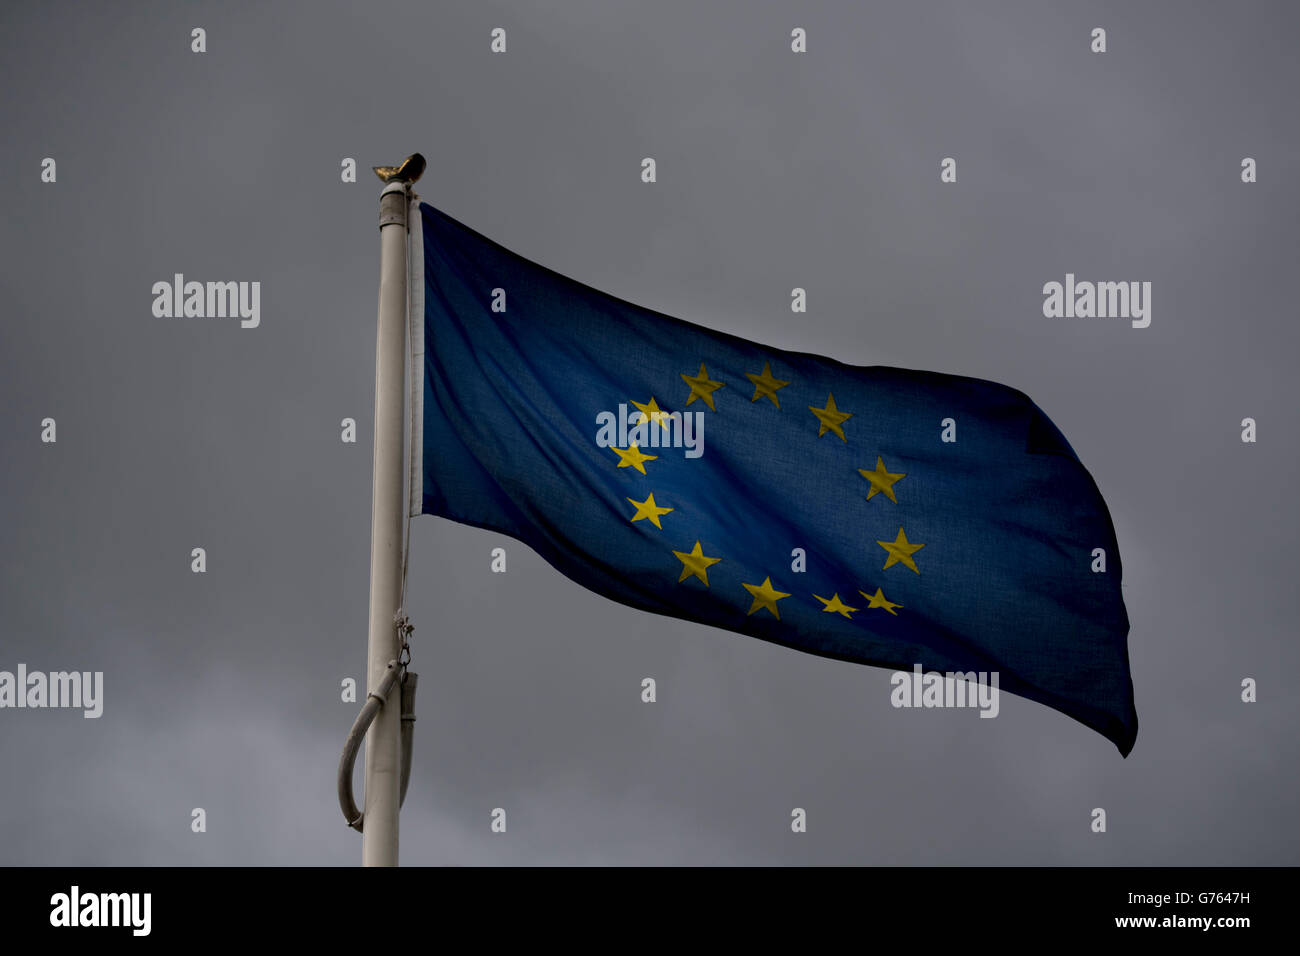 European Union (EU) flag blowing in the wind with dark storm clouds behind. Britain left the EU in a recent referendum. Stock Photo